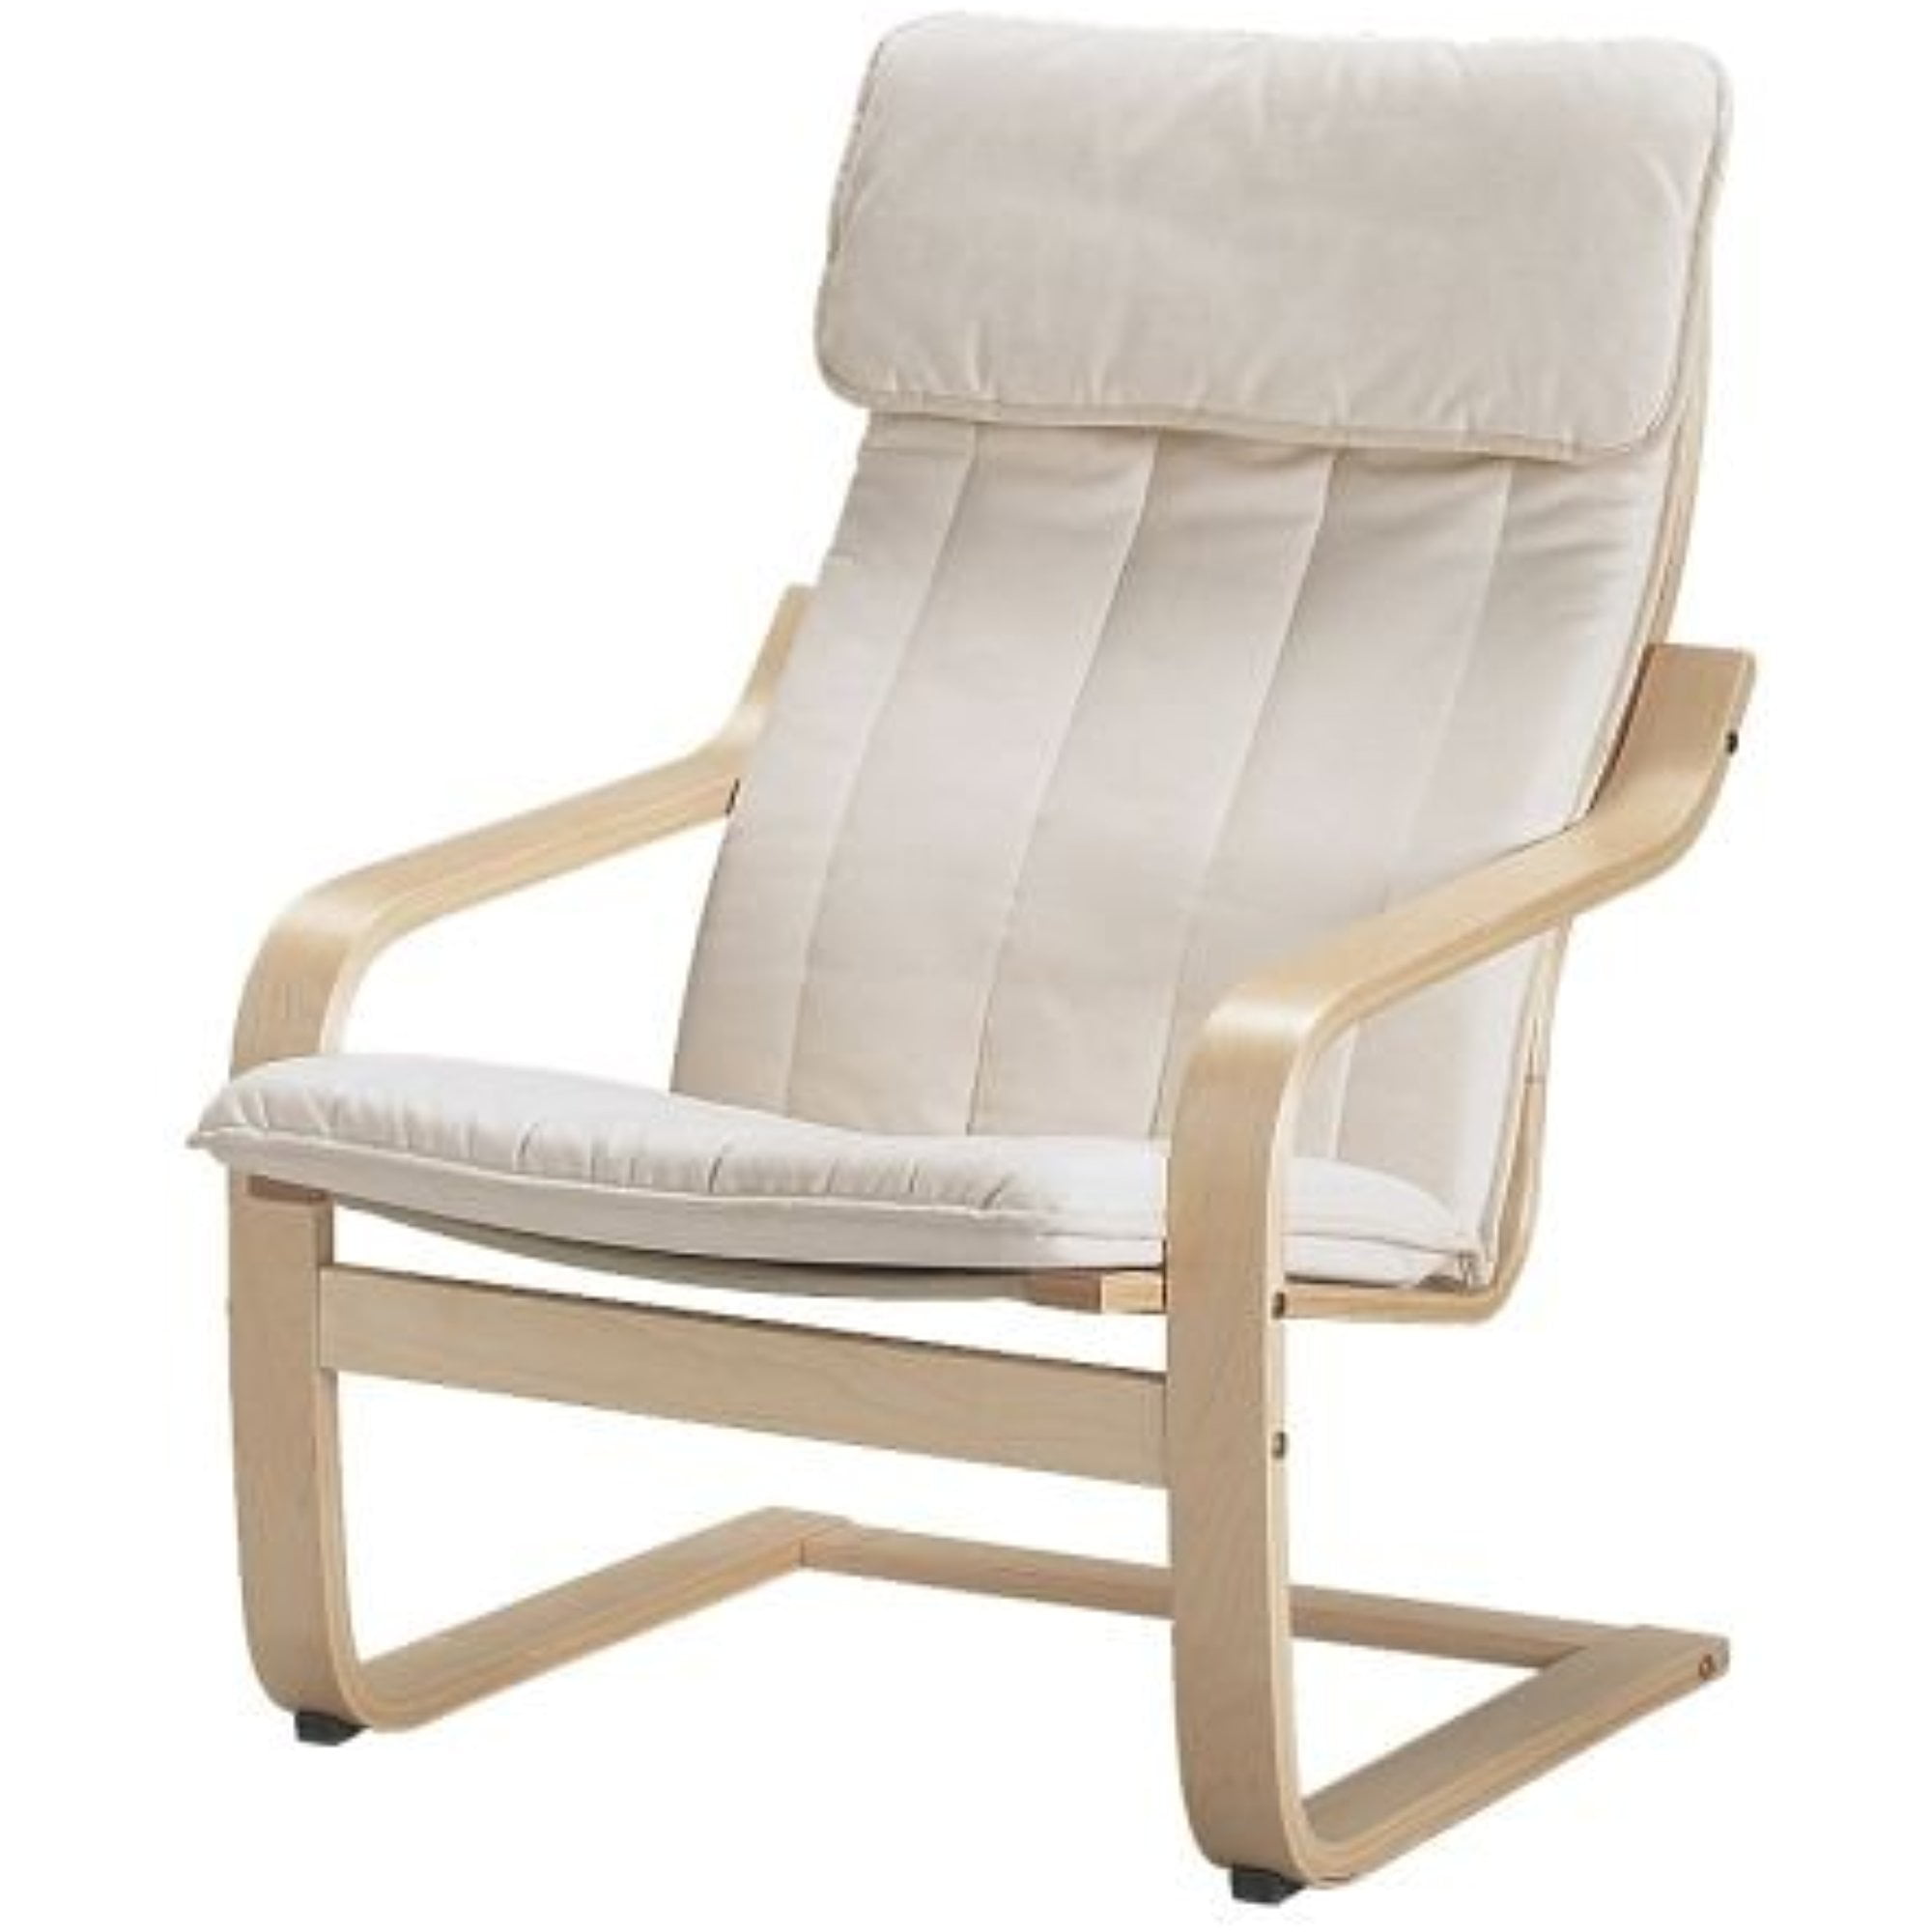 IKEA Poang chair cushion Hillared beige for Sale in Chicago, IL